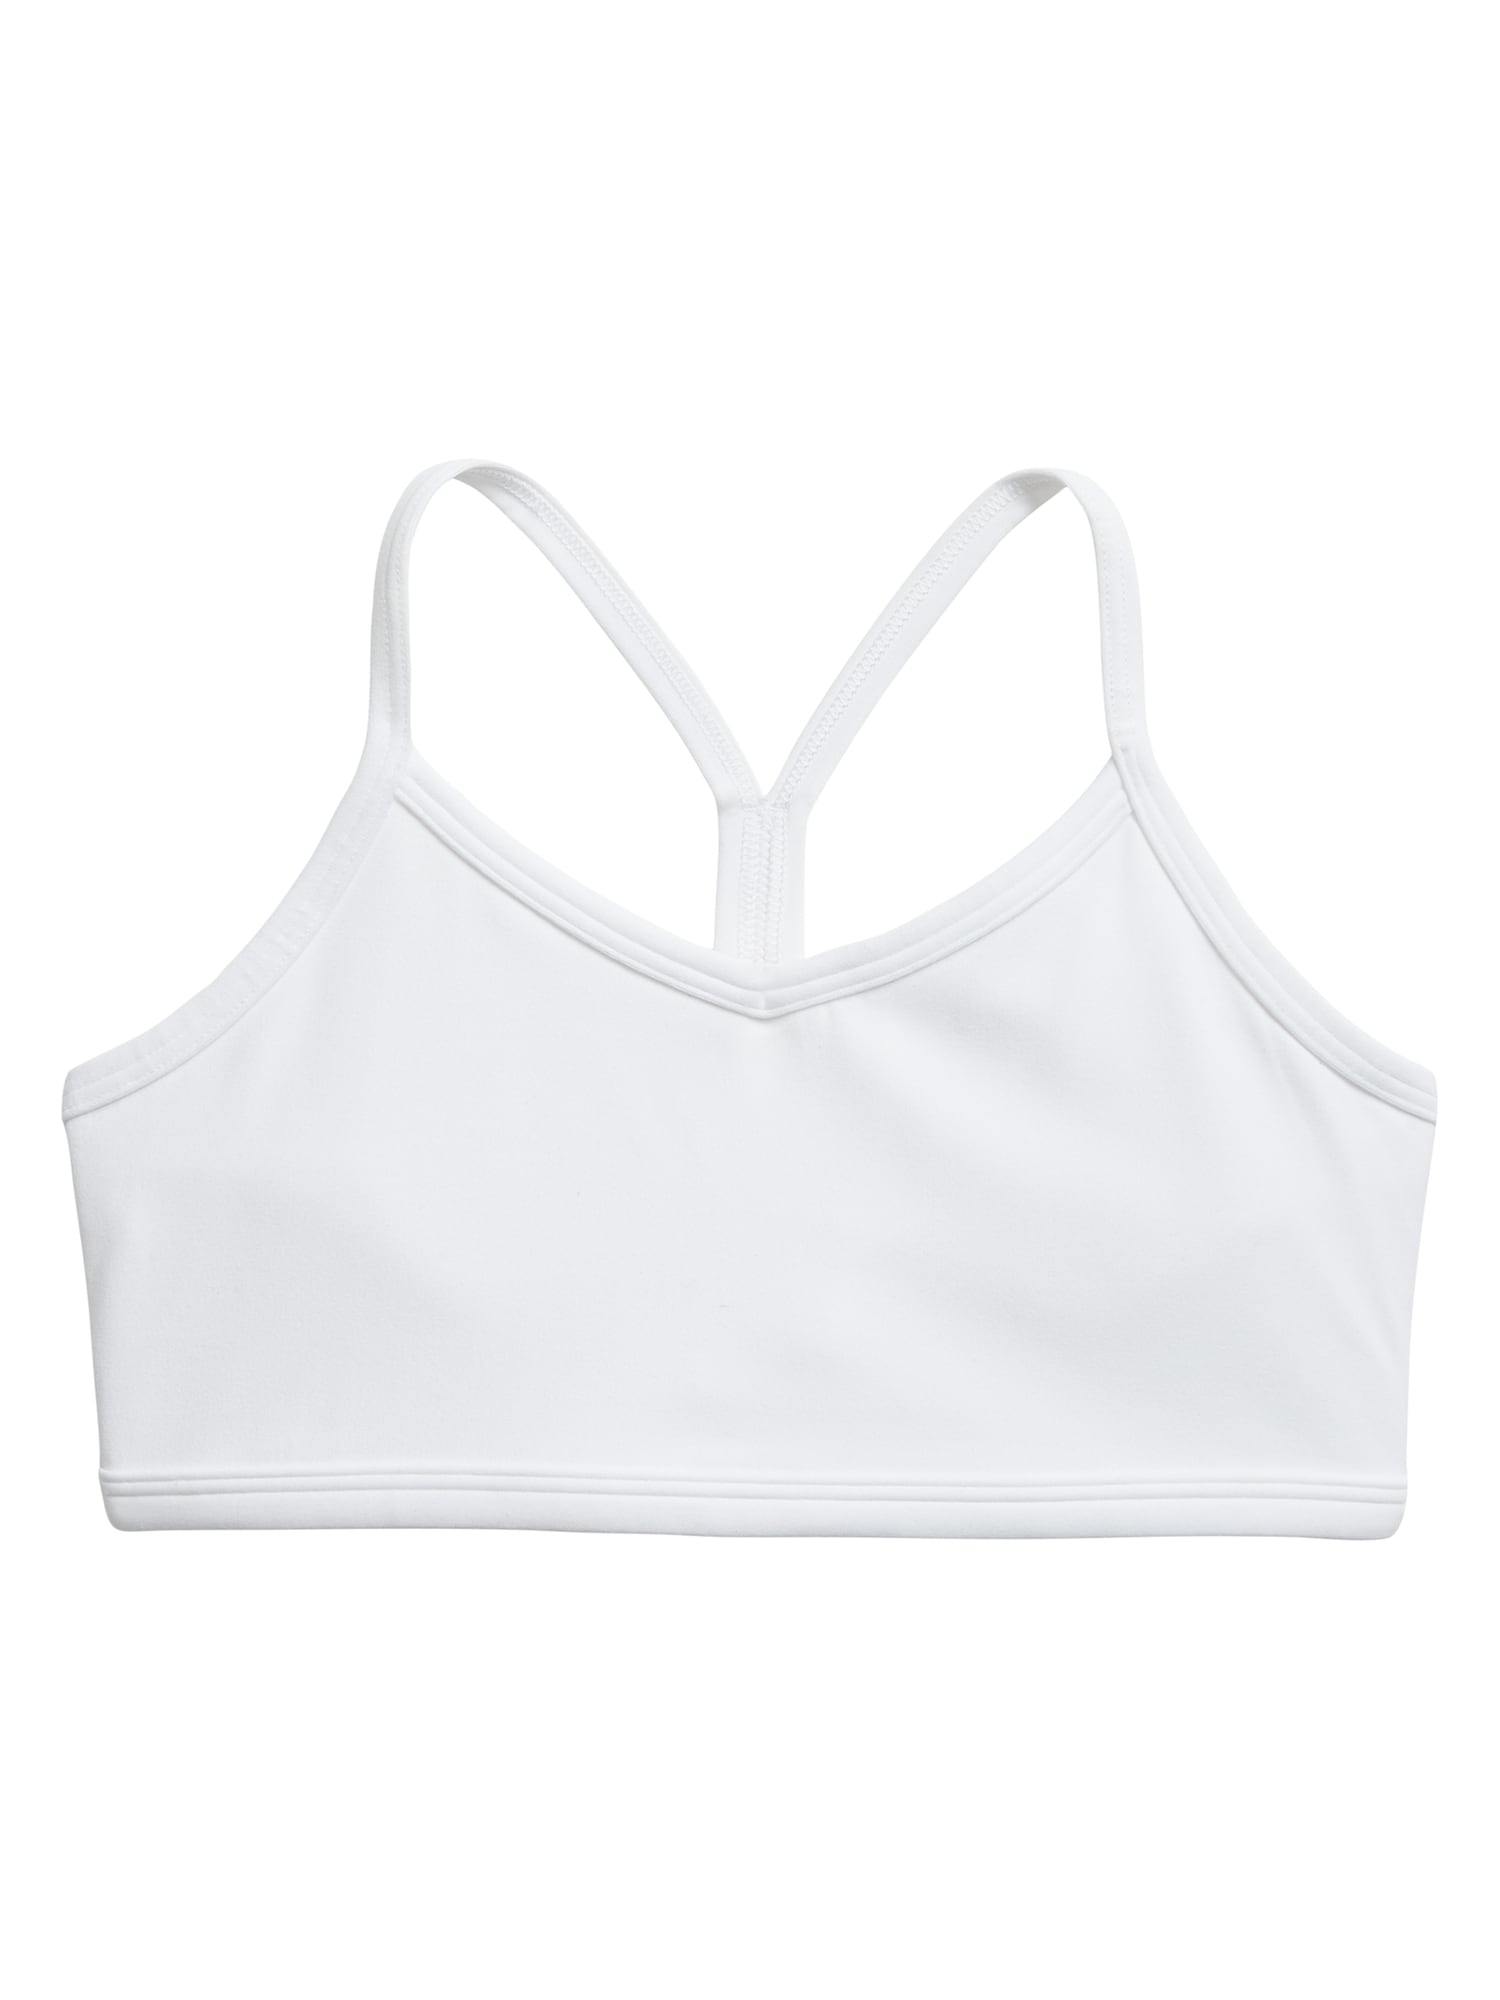 Buy BODYCARE Women's Cotton Heavily Padded Non-Wired T-Shirt Bra  (E1574PEPE-30B_Peach_30) at